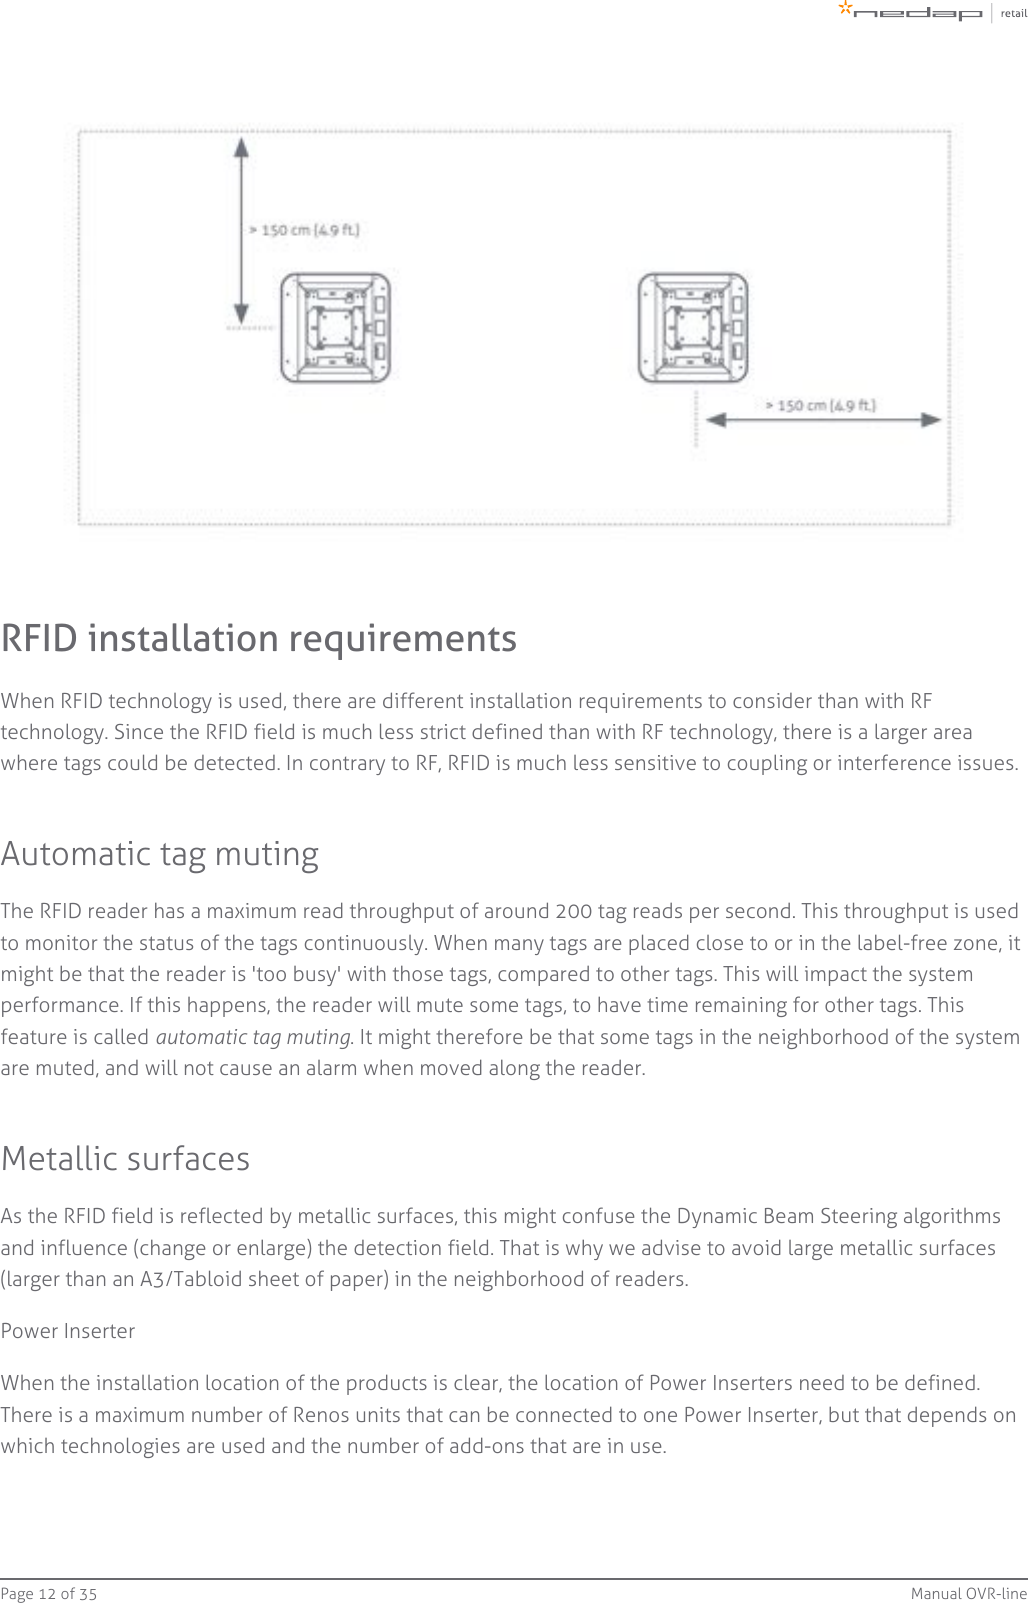 Page   of 12 35 Manual OVR-lineRFID installation requirementsWhen RFID technology is used, there are different installation requirements to consider than with RFtechnology. Since the RFID field is much less strict defined than with RF technology, there is a larger areawhere tags could be detected. In contrary to RF, RFID is much less sensitive to coupling or interference issues.Automatic tag mutingThe RFID reader has a maximum read throughput of around 200 tag reads per second. This throughput is usedto monitor the status of the tags continuously. When many tags are placed close to or in the label-free zone, itmight be that the reader is &apos;too busy&apos; with those tags, compared to other tags. This will impact the systemperformance. If this happens, the reader will mute some tags, to have time remaining for other tags. Thisfeature is called  . It might therefore be that some tags in the neighborhood of the systemautomatic tag mutingare muted, and will not cause an alarm when moved along the reader.Metallic surfacesAs the RFID field is reflected by metallic surfaces, this might confuse the Dynamic Beam Steering algorithmsand influence (change or enlarge) the detection field. That is why we advise to avoid large metallic surfaces(larger than an A3/Tabloid sheet of paper) in the neighborhood of readers.Power InserterWhen the installation location of the products is clear, the location of Power Inserters need to be defined.There is a maximum number of Renos units that can be connected to one Power Inserter, but that depends onwhich technologies are used and the number of add-ons that are in use.